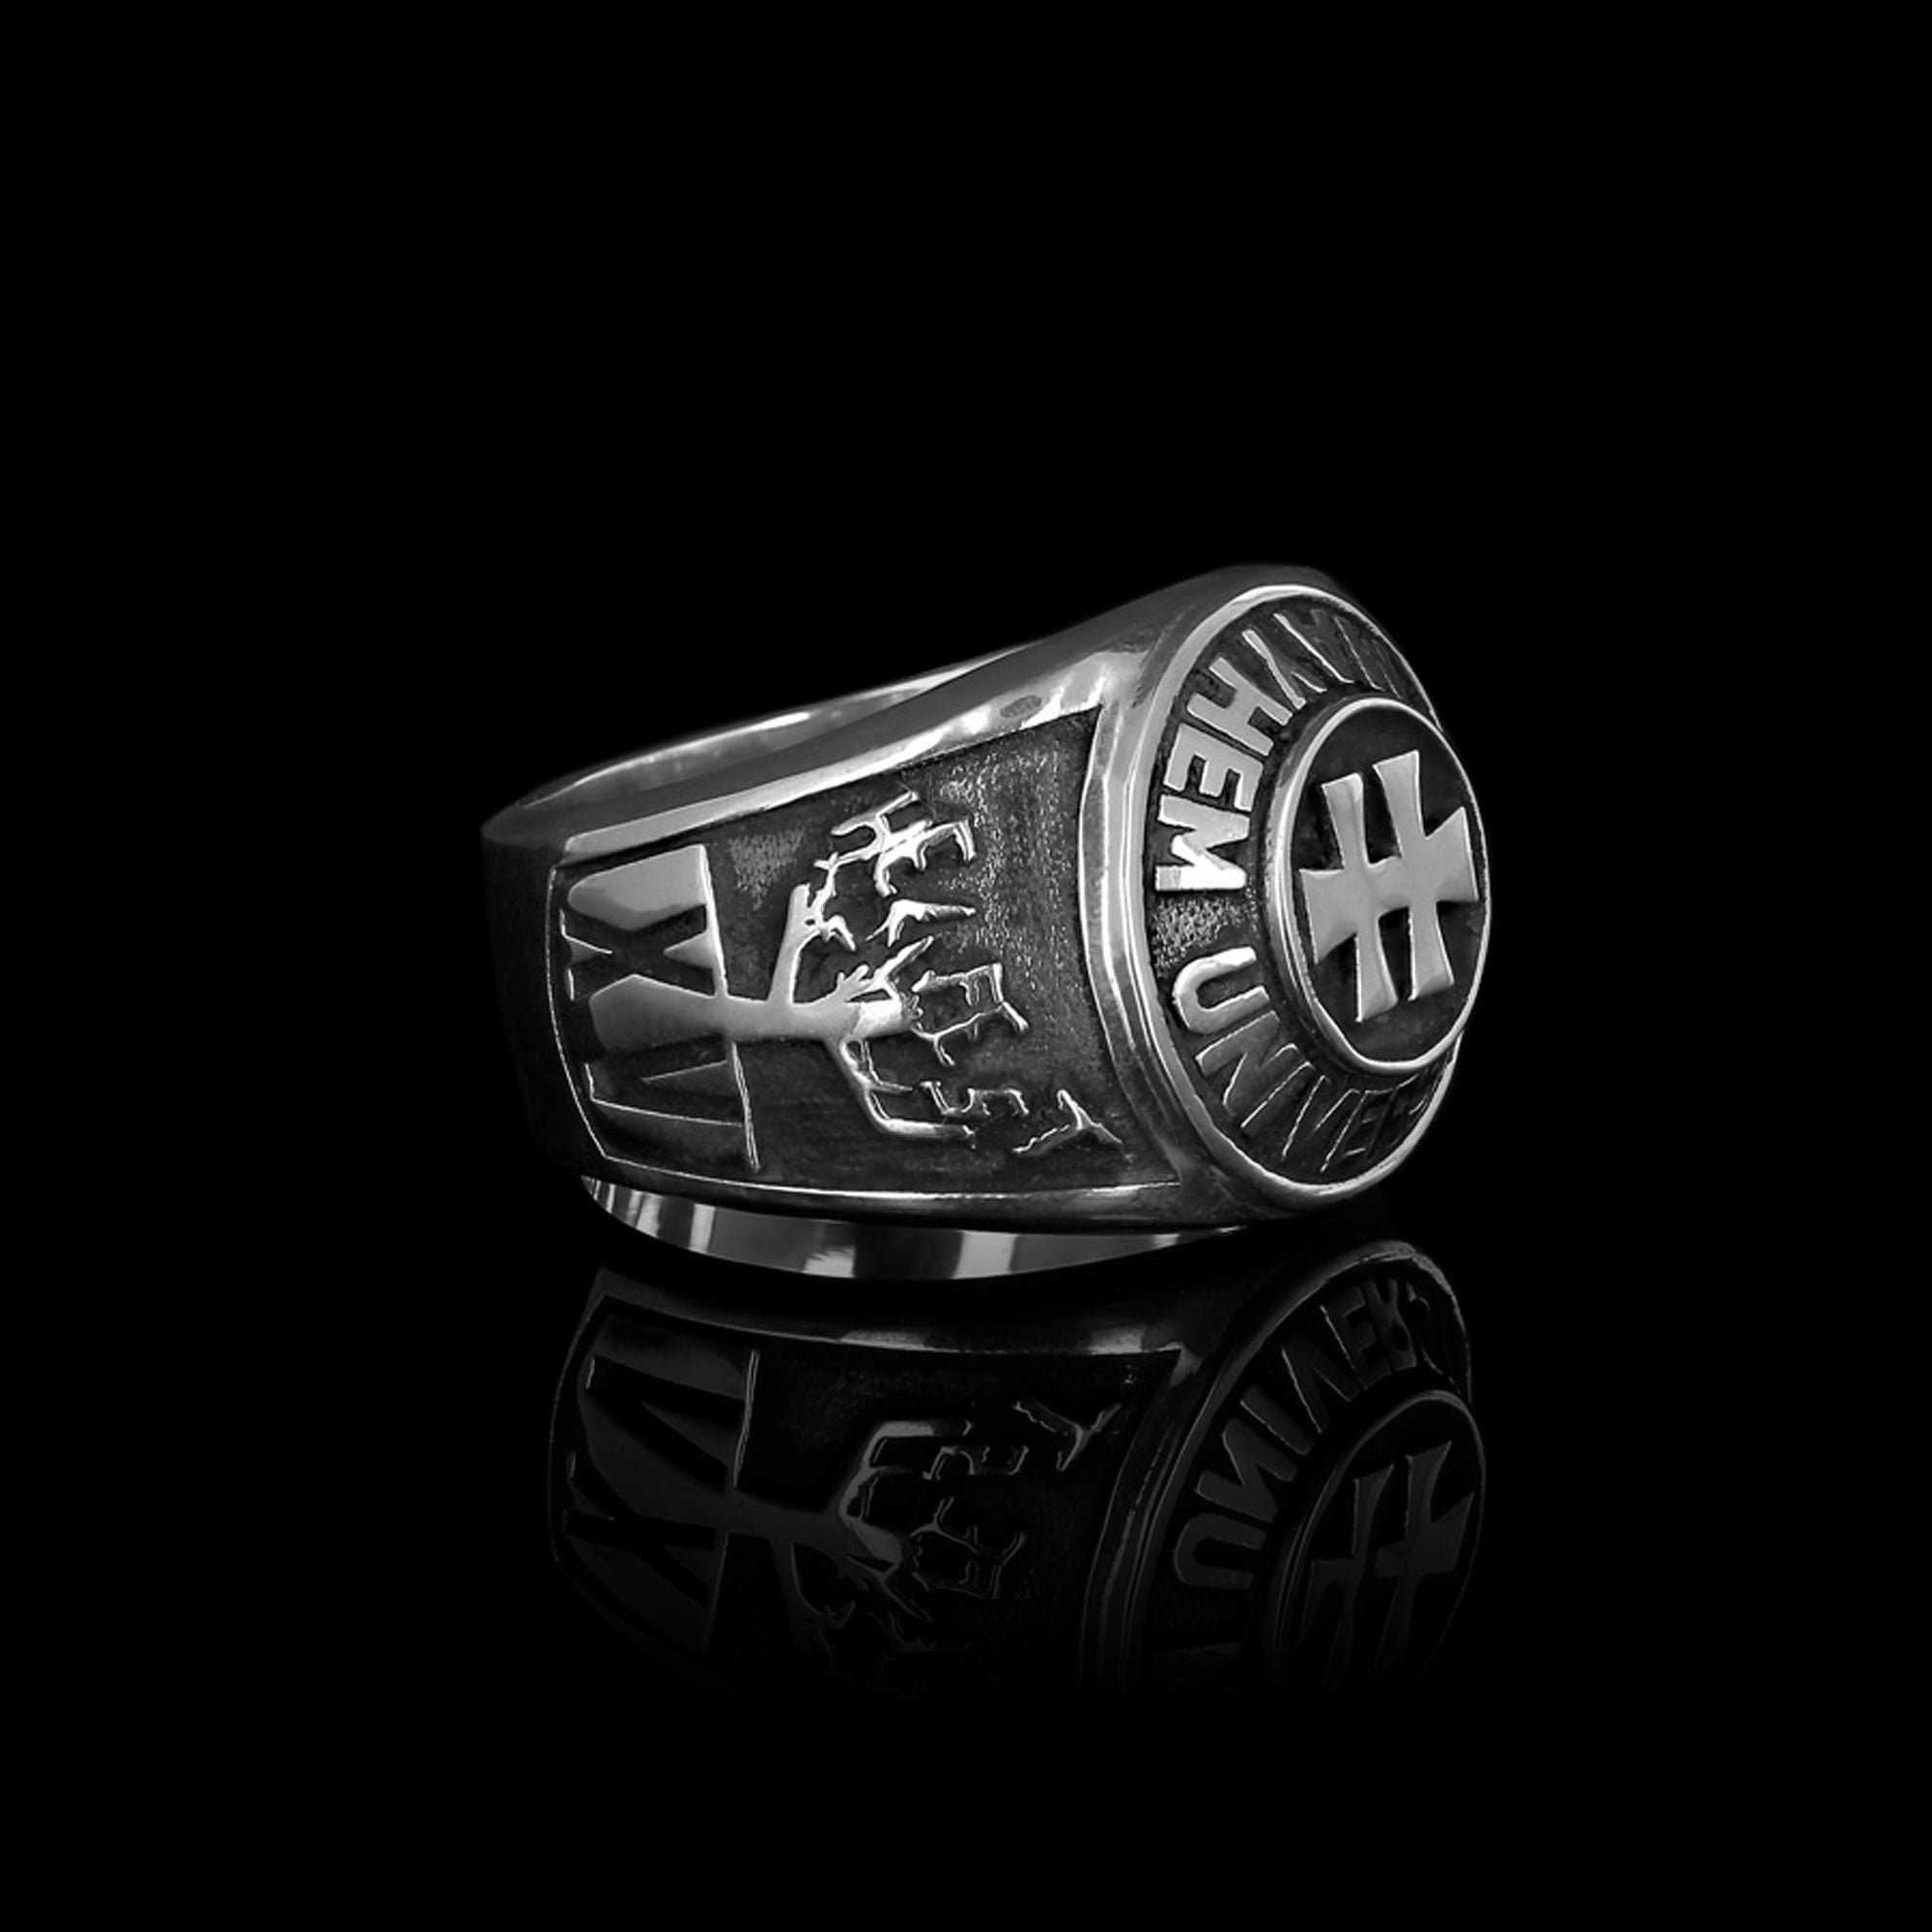 Hellfest 15th Anniversary Limited Edition University Ring